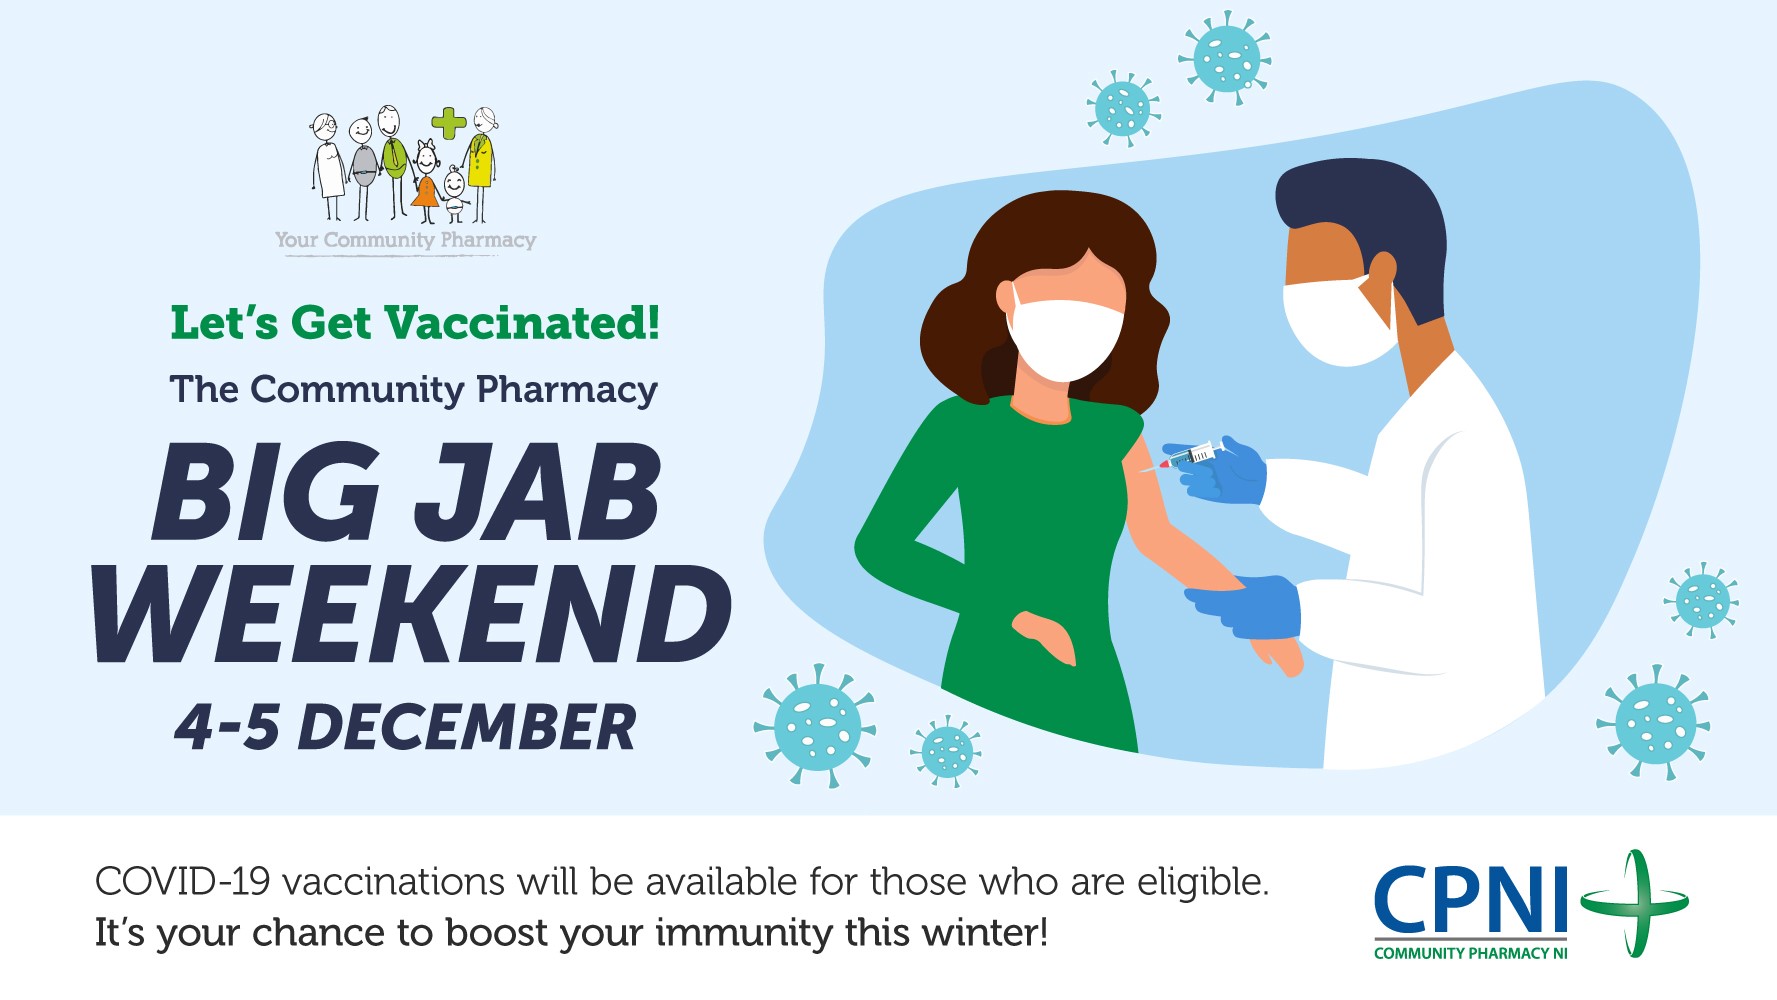 Community Pharmacy “Big Jab Weekend” drive to boost vaccination programme